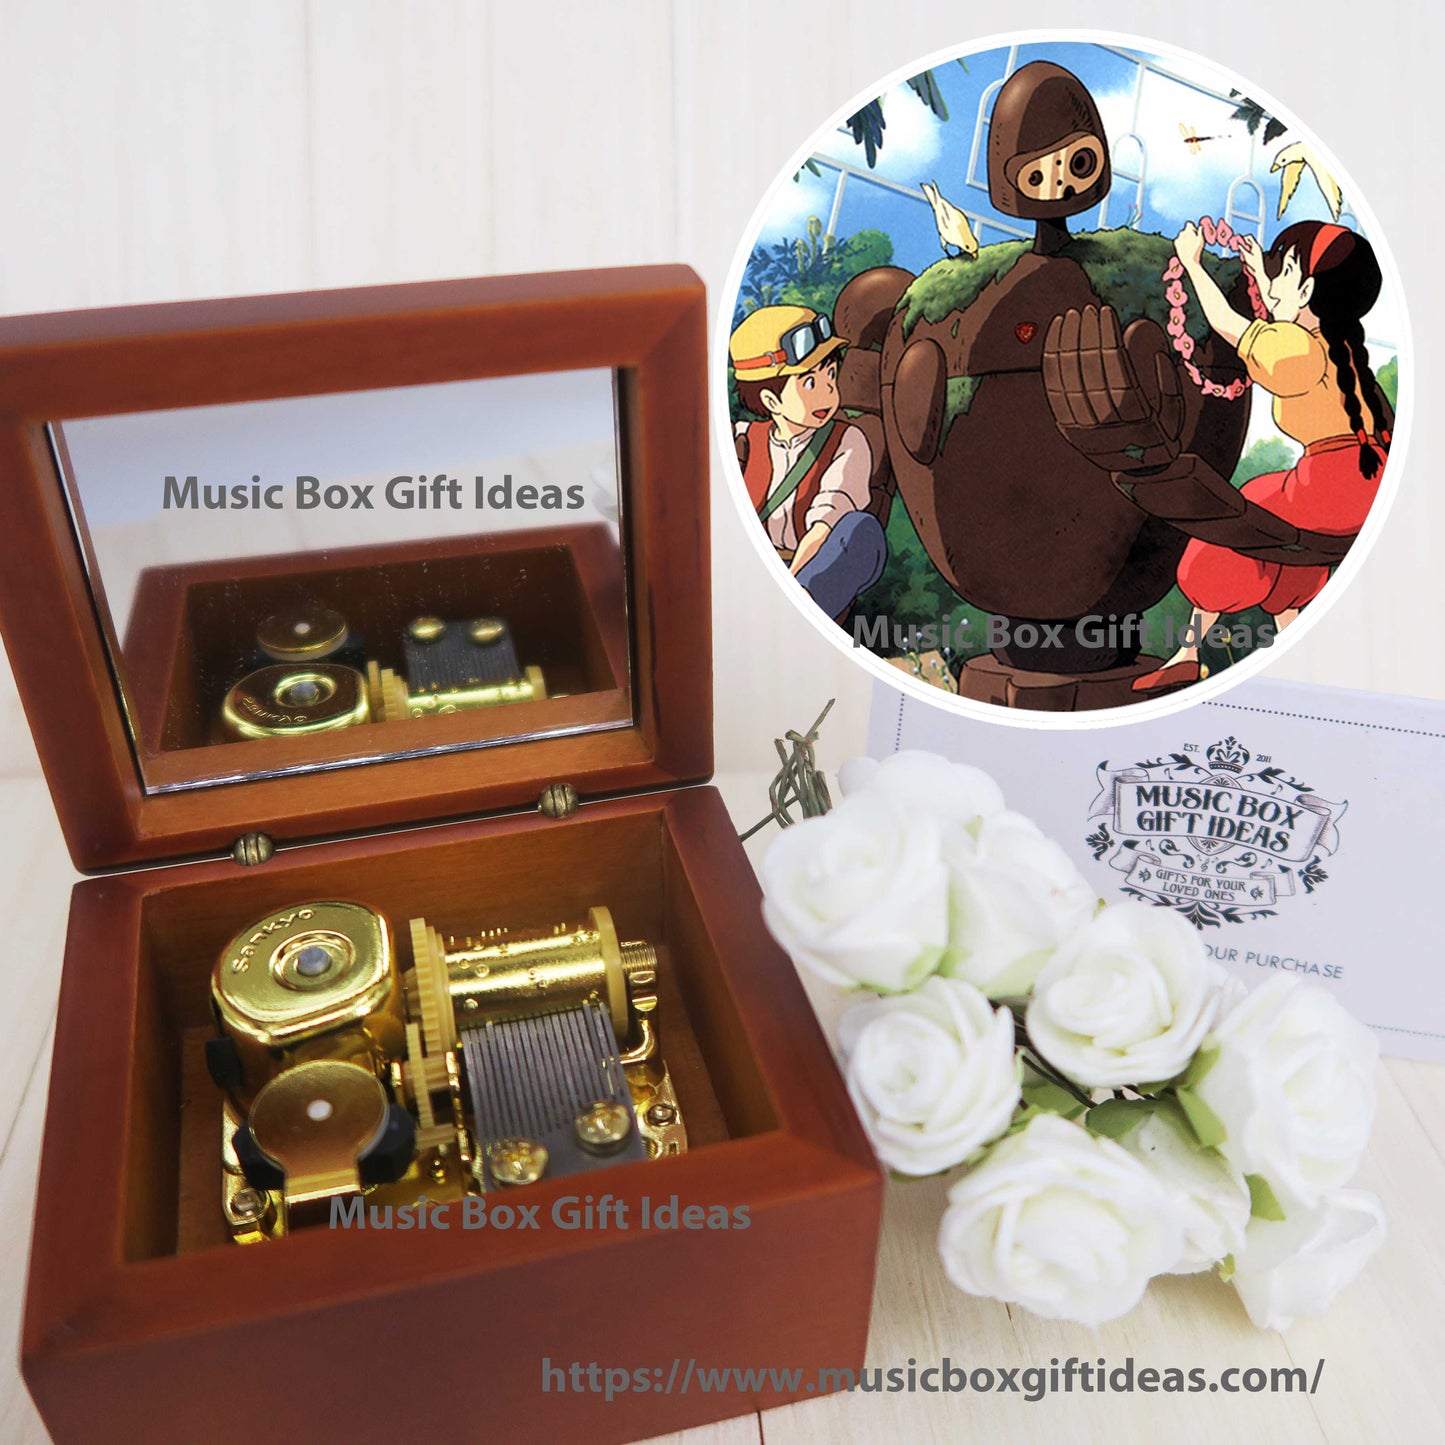 Castle in The Sky Carrying You Laputa from Studio Ghibli 18-Note Music Box Gift  (Wooden Clockwork) - Music Box Gift Ideas